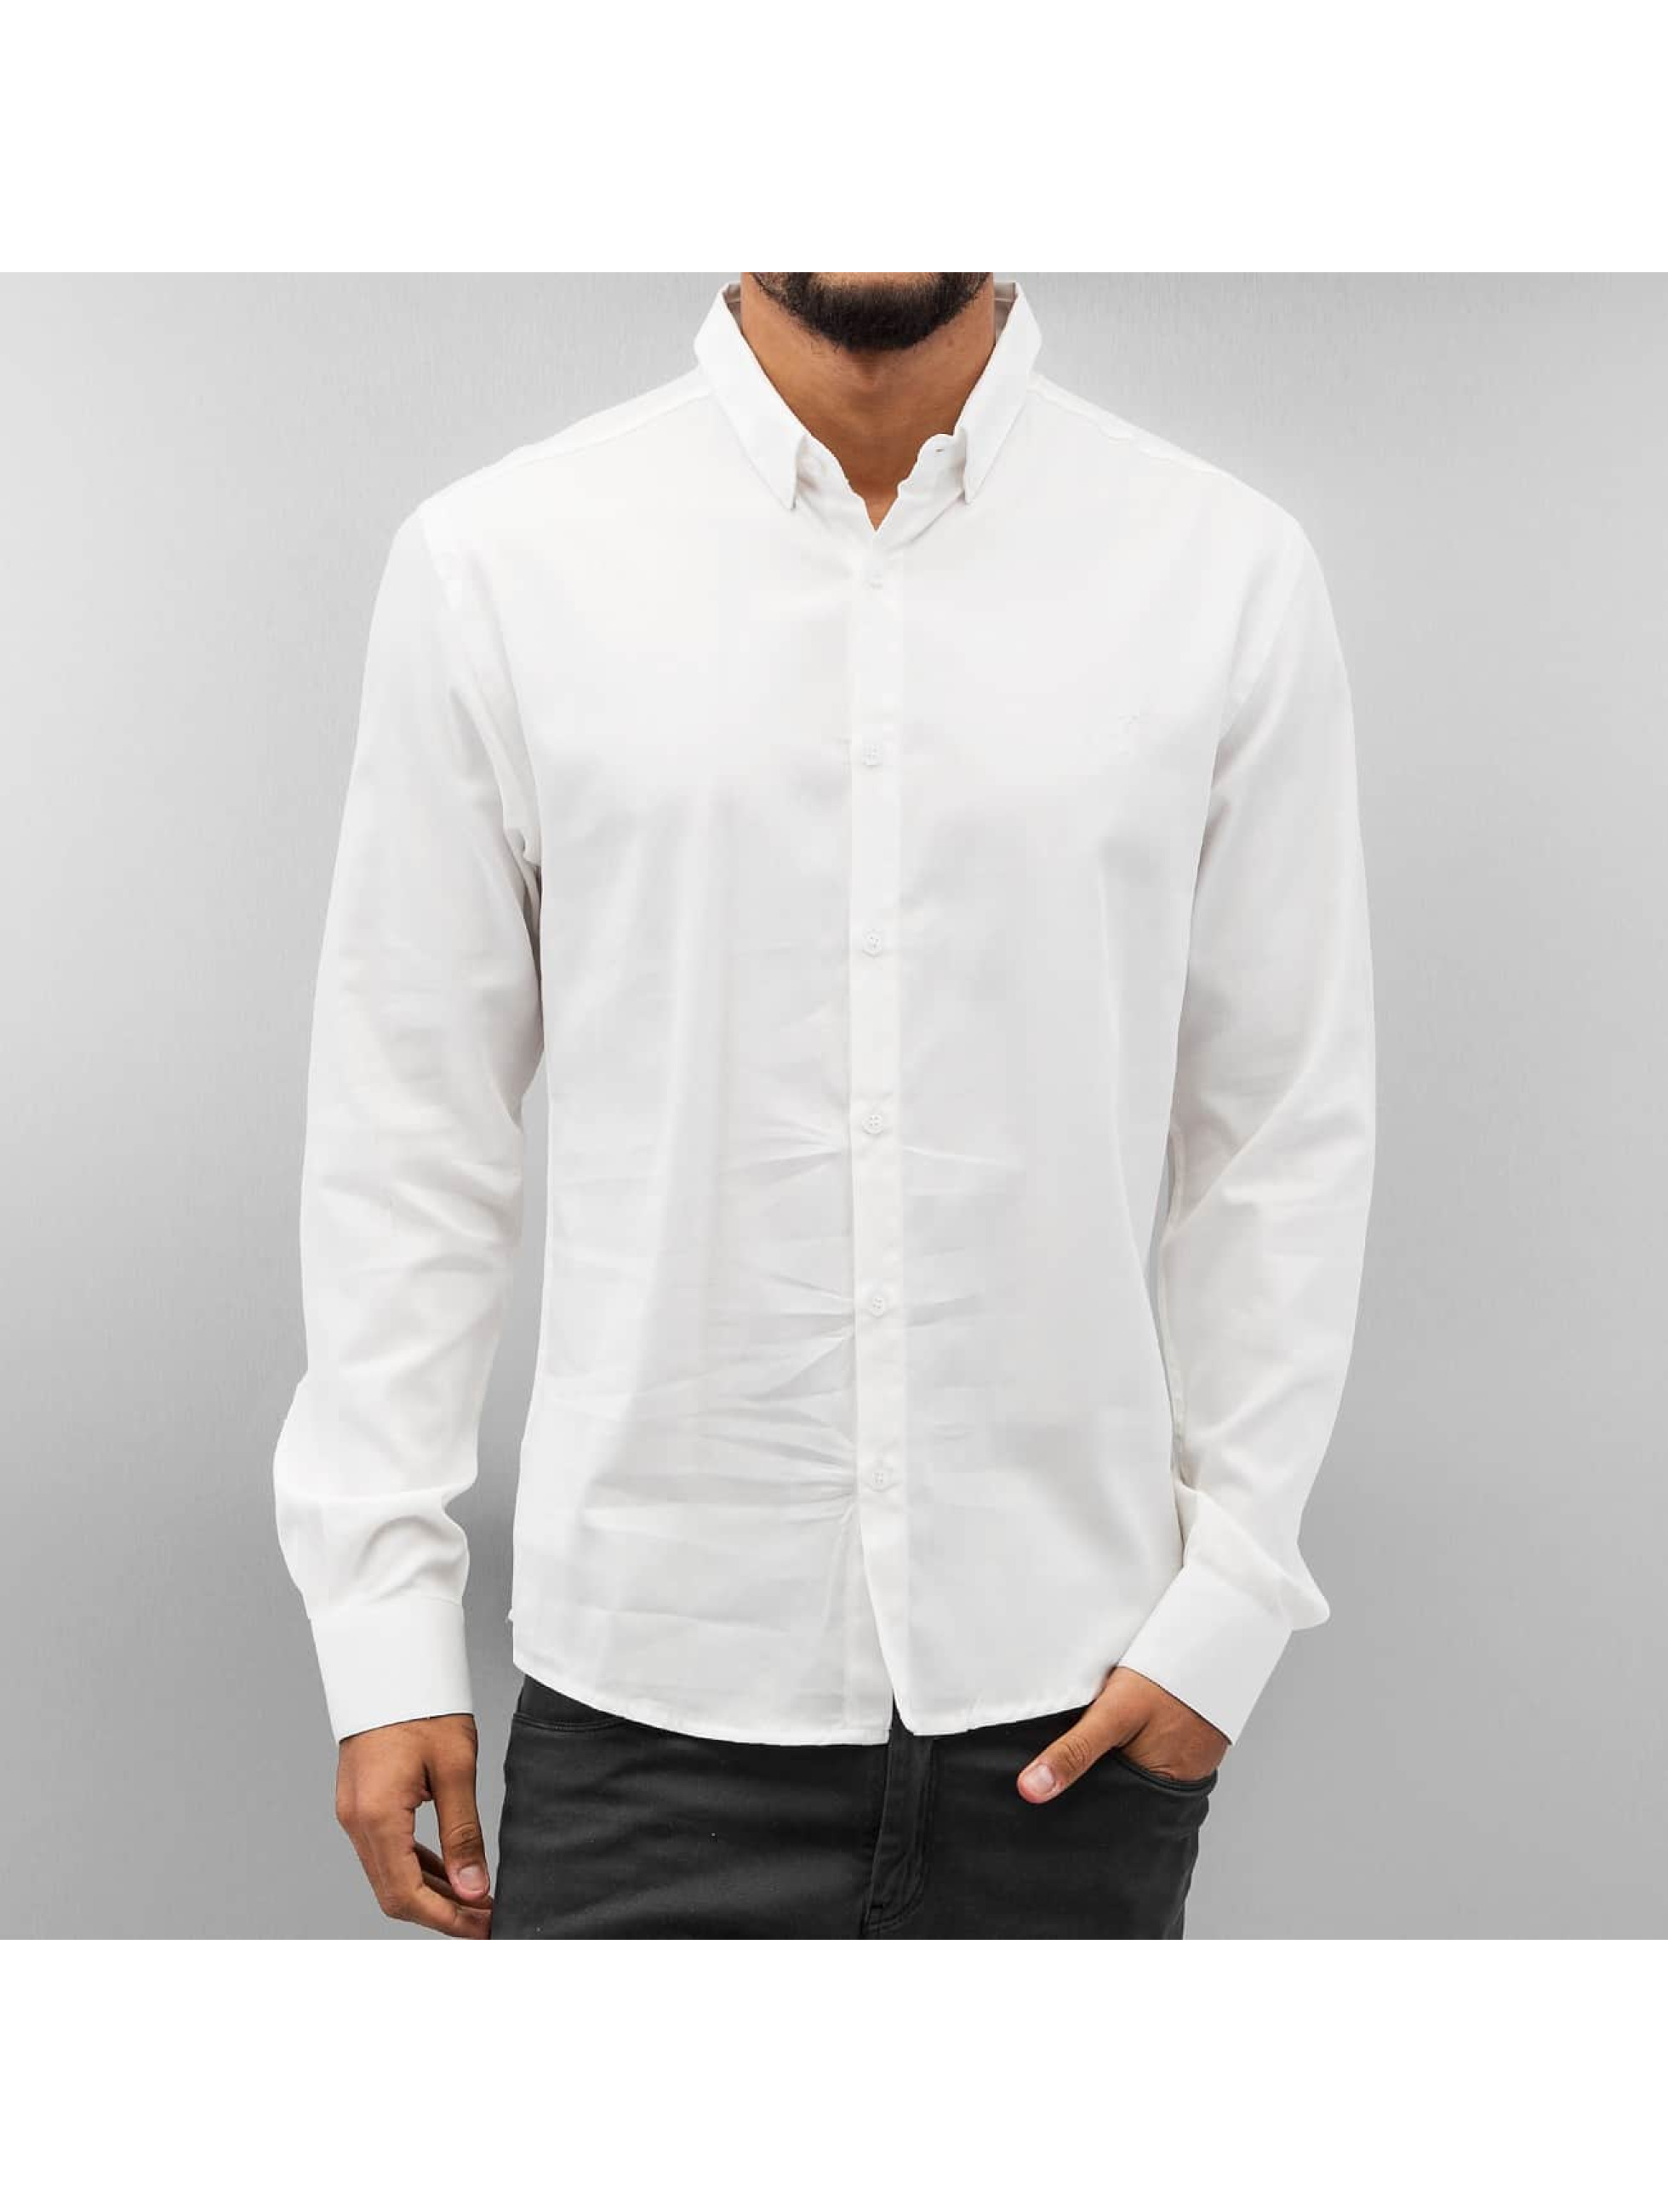 Cazzy Clang Haut / Chemise Rom en blanc